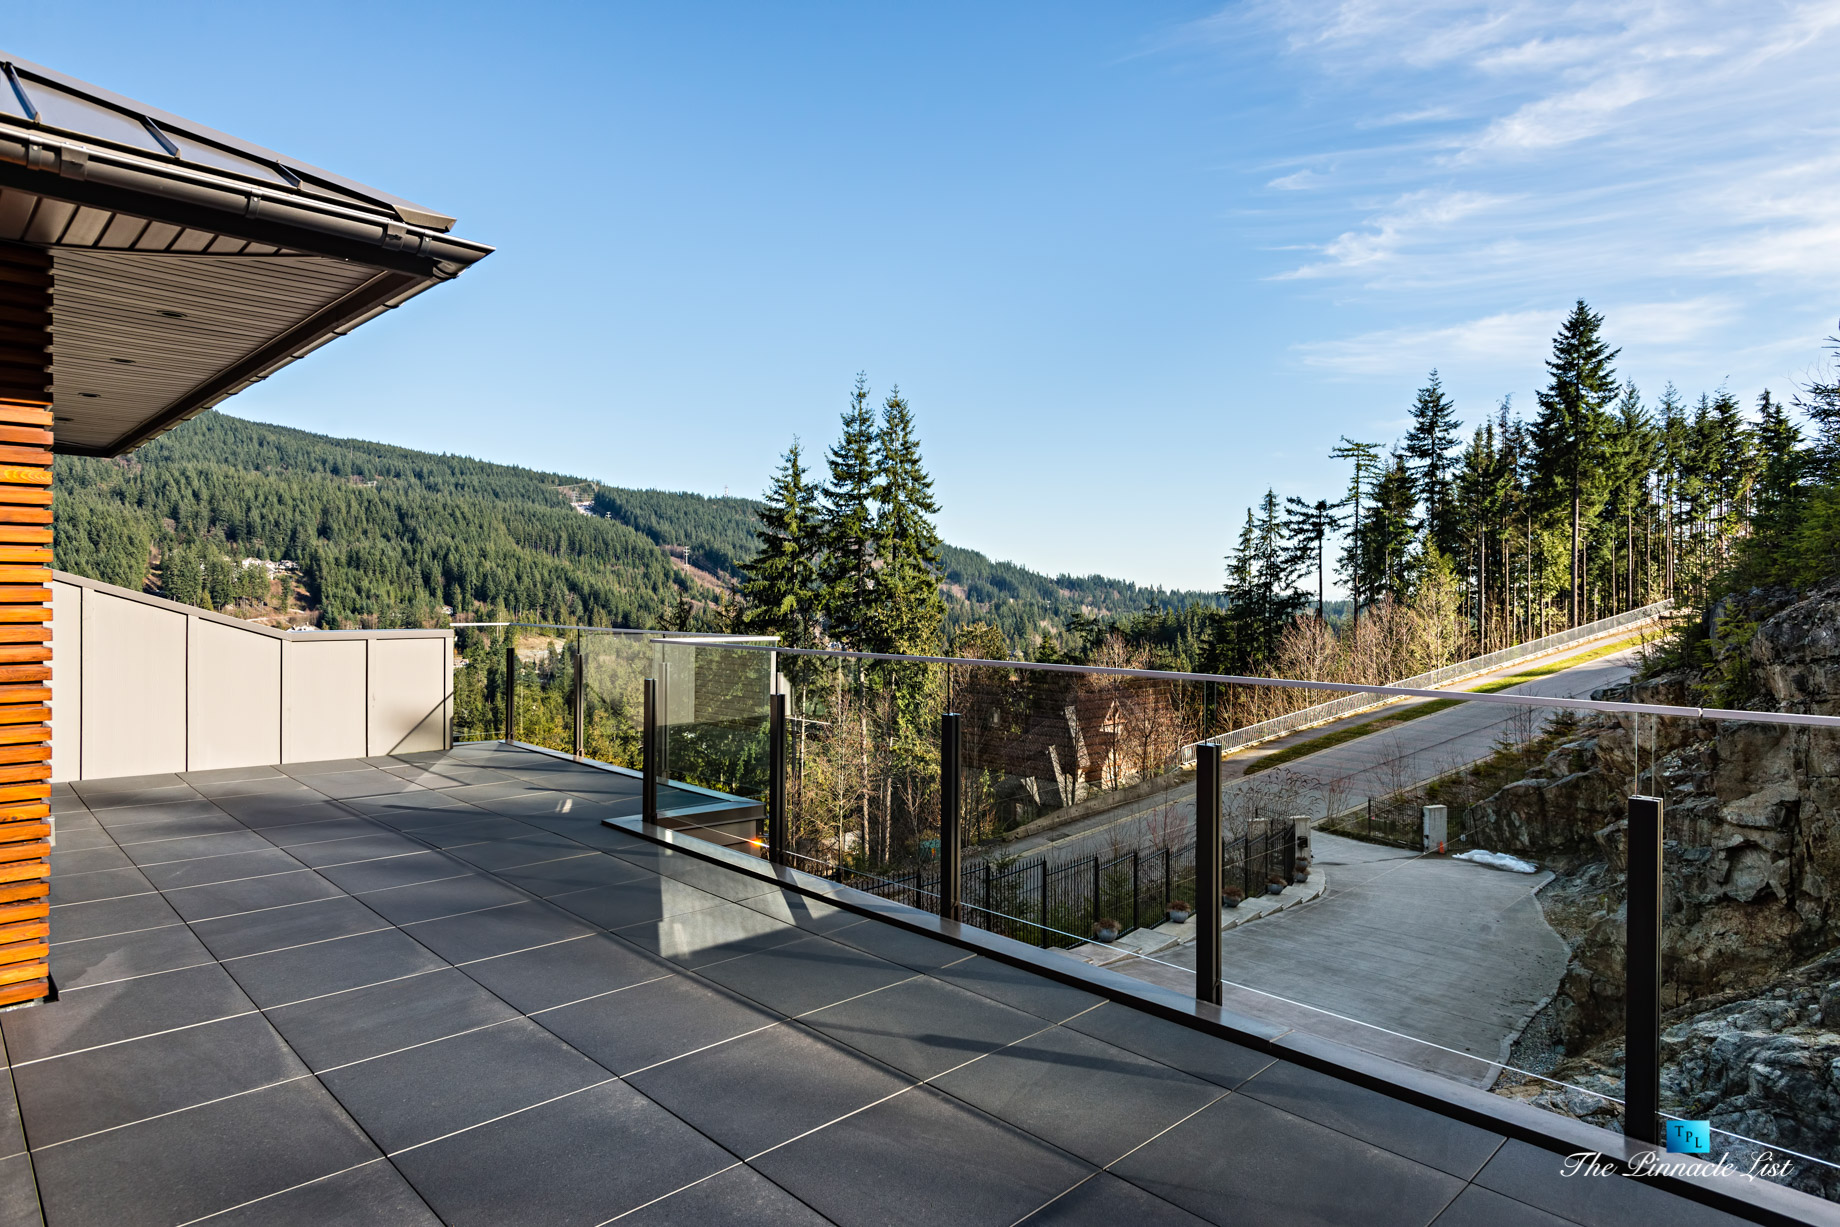 1083 Uplands Dr, Anmore, BC, Canada - Private Outdoor Mountain View Deck - Luxury Real Estate - Greater Vancouver West Coast Modern Home